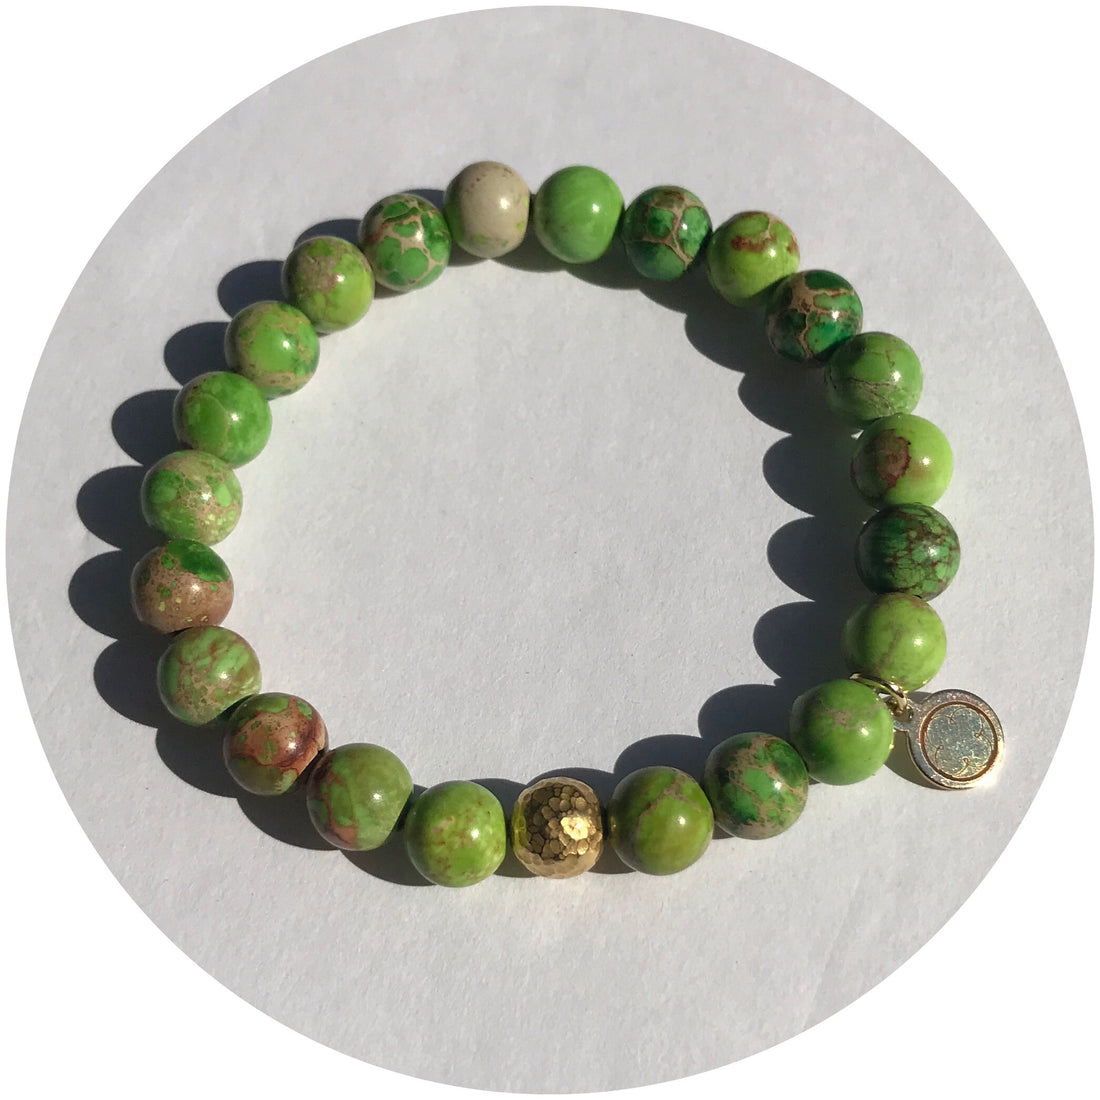 Green Imperial Jasper with Hammered Gold Accent - Oriana Lamarca LLC